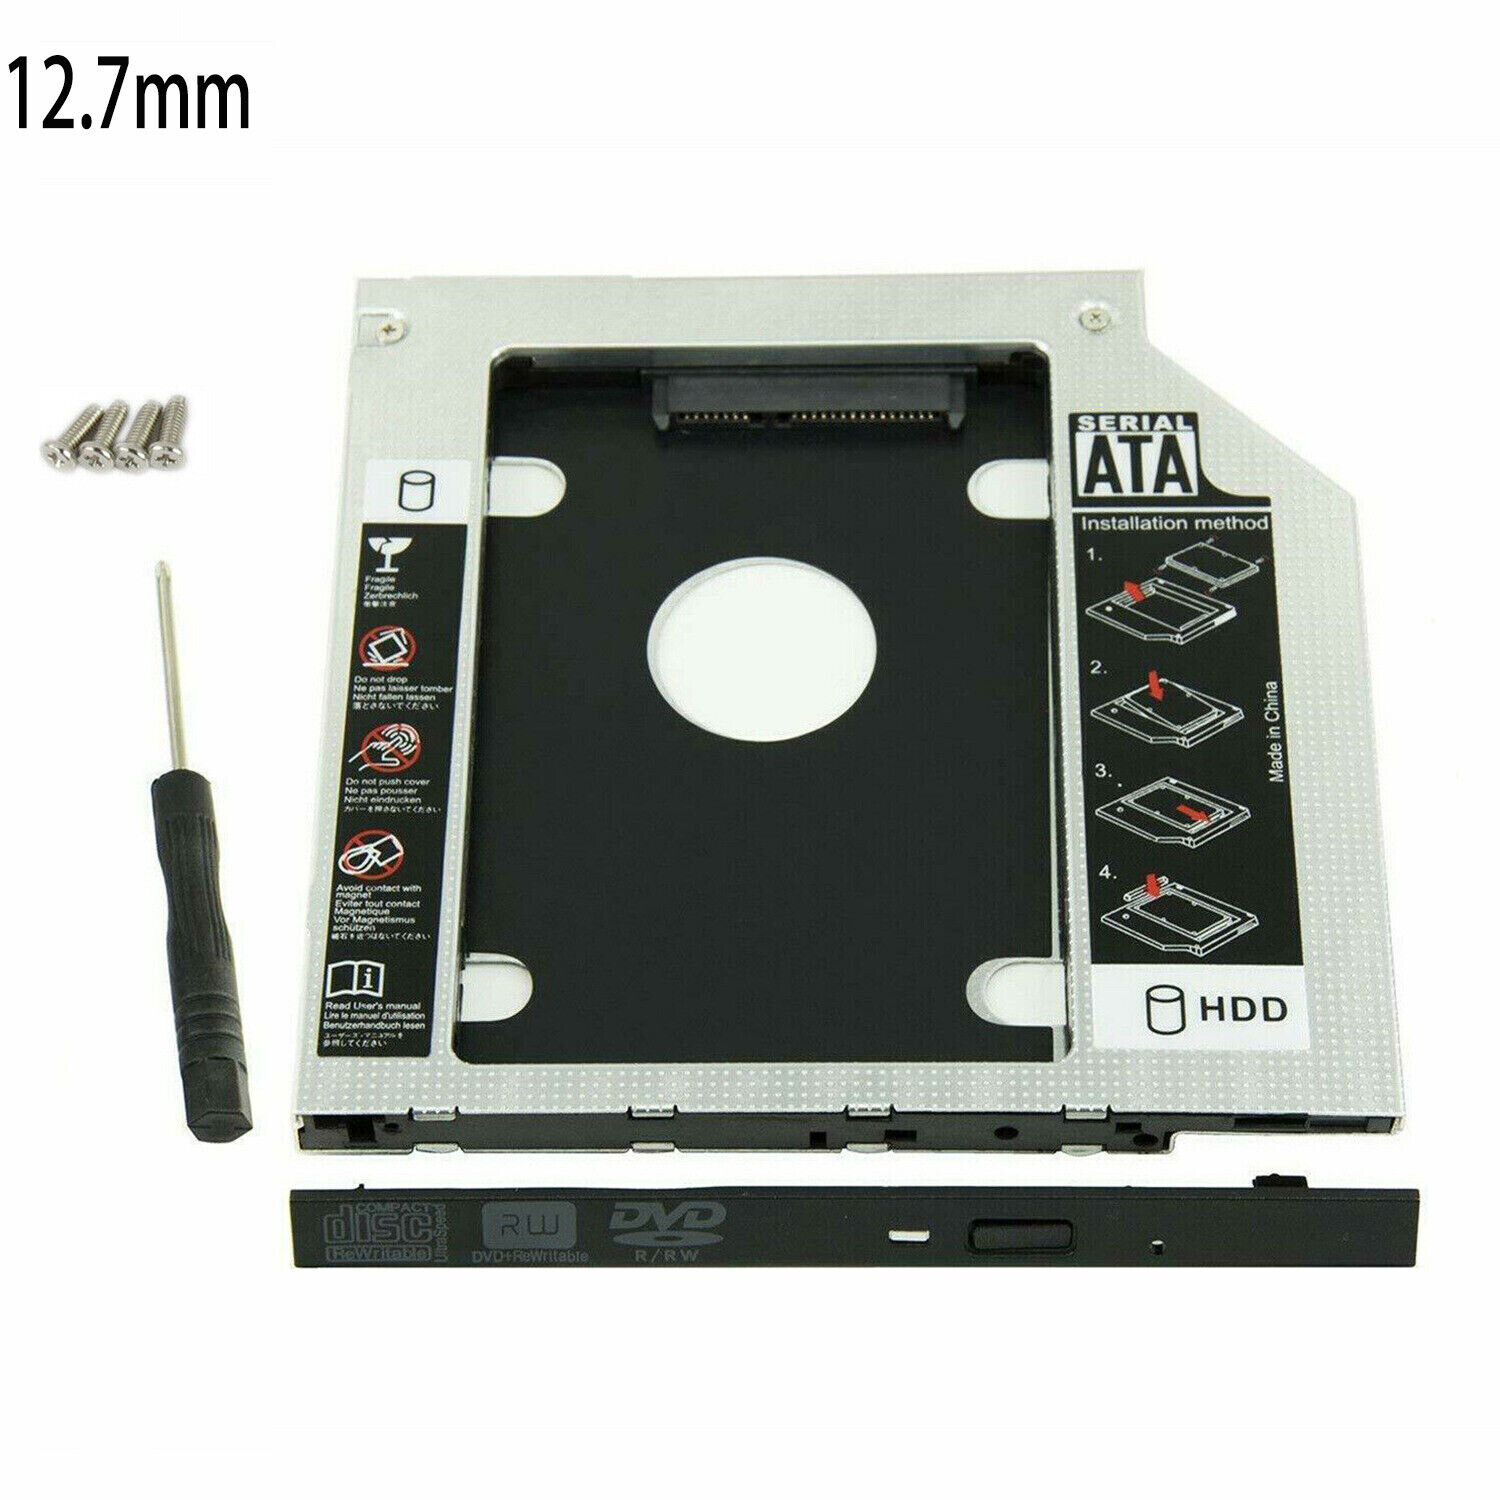 12.7mm Universal for SATA 2nd HDD SSD Hard Drive Caddy CD/DVD-ROM Optical Bay US